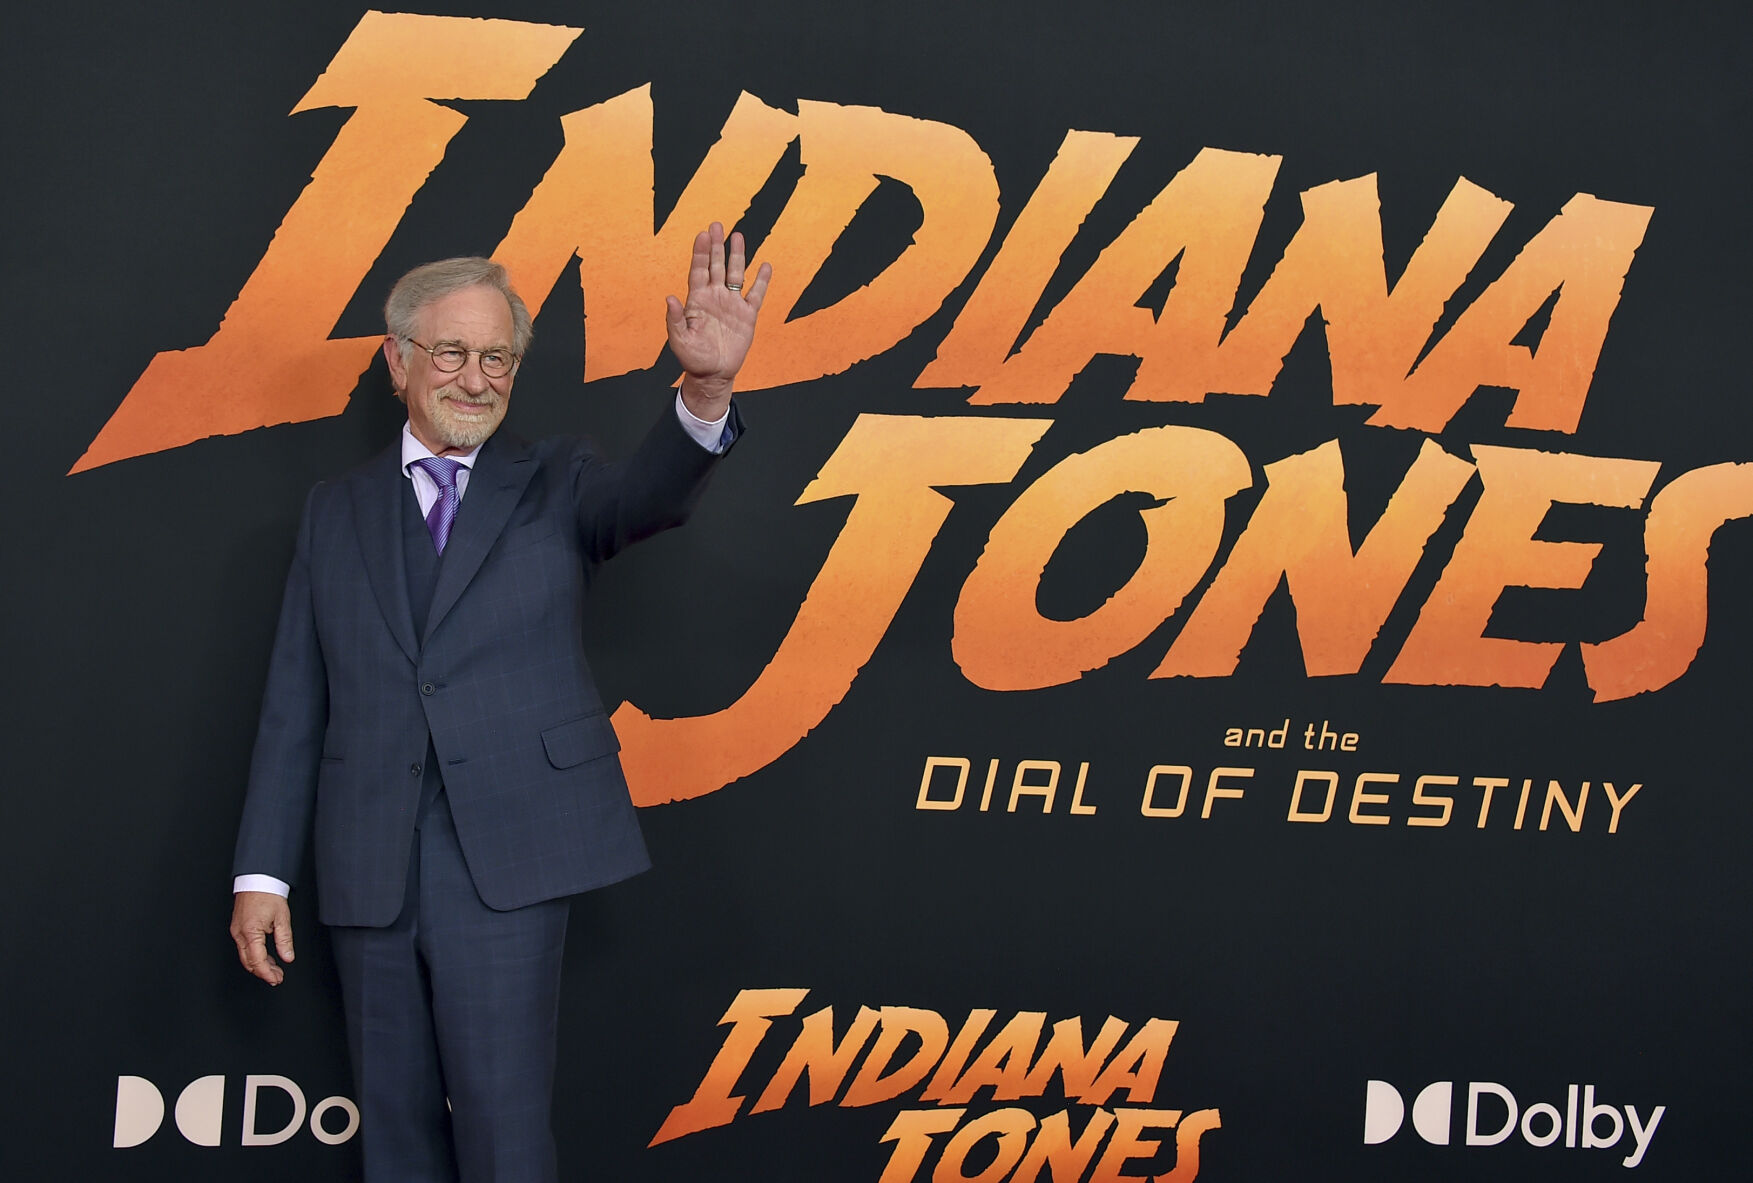 Steven Spielberg arrives at the premiere of "Indiana Jones and the Dial of Destiny," Wednesday, June 14, 2023, at El Capitan Theatre in Los Angeles.